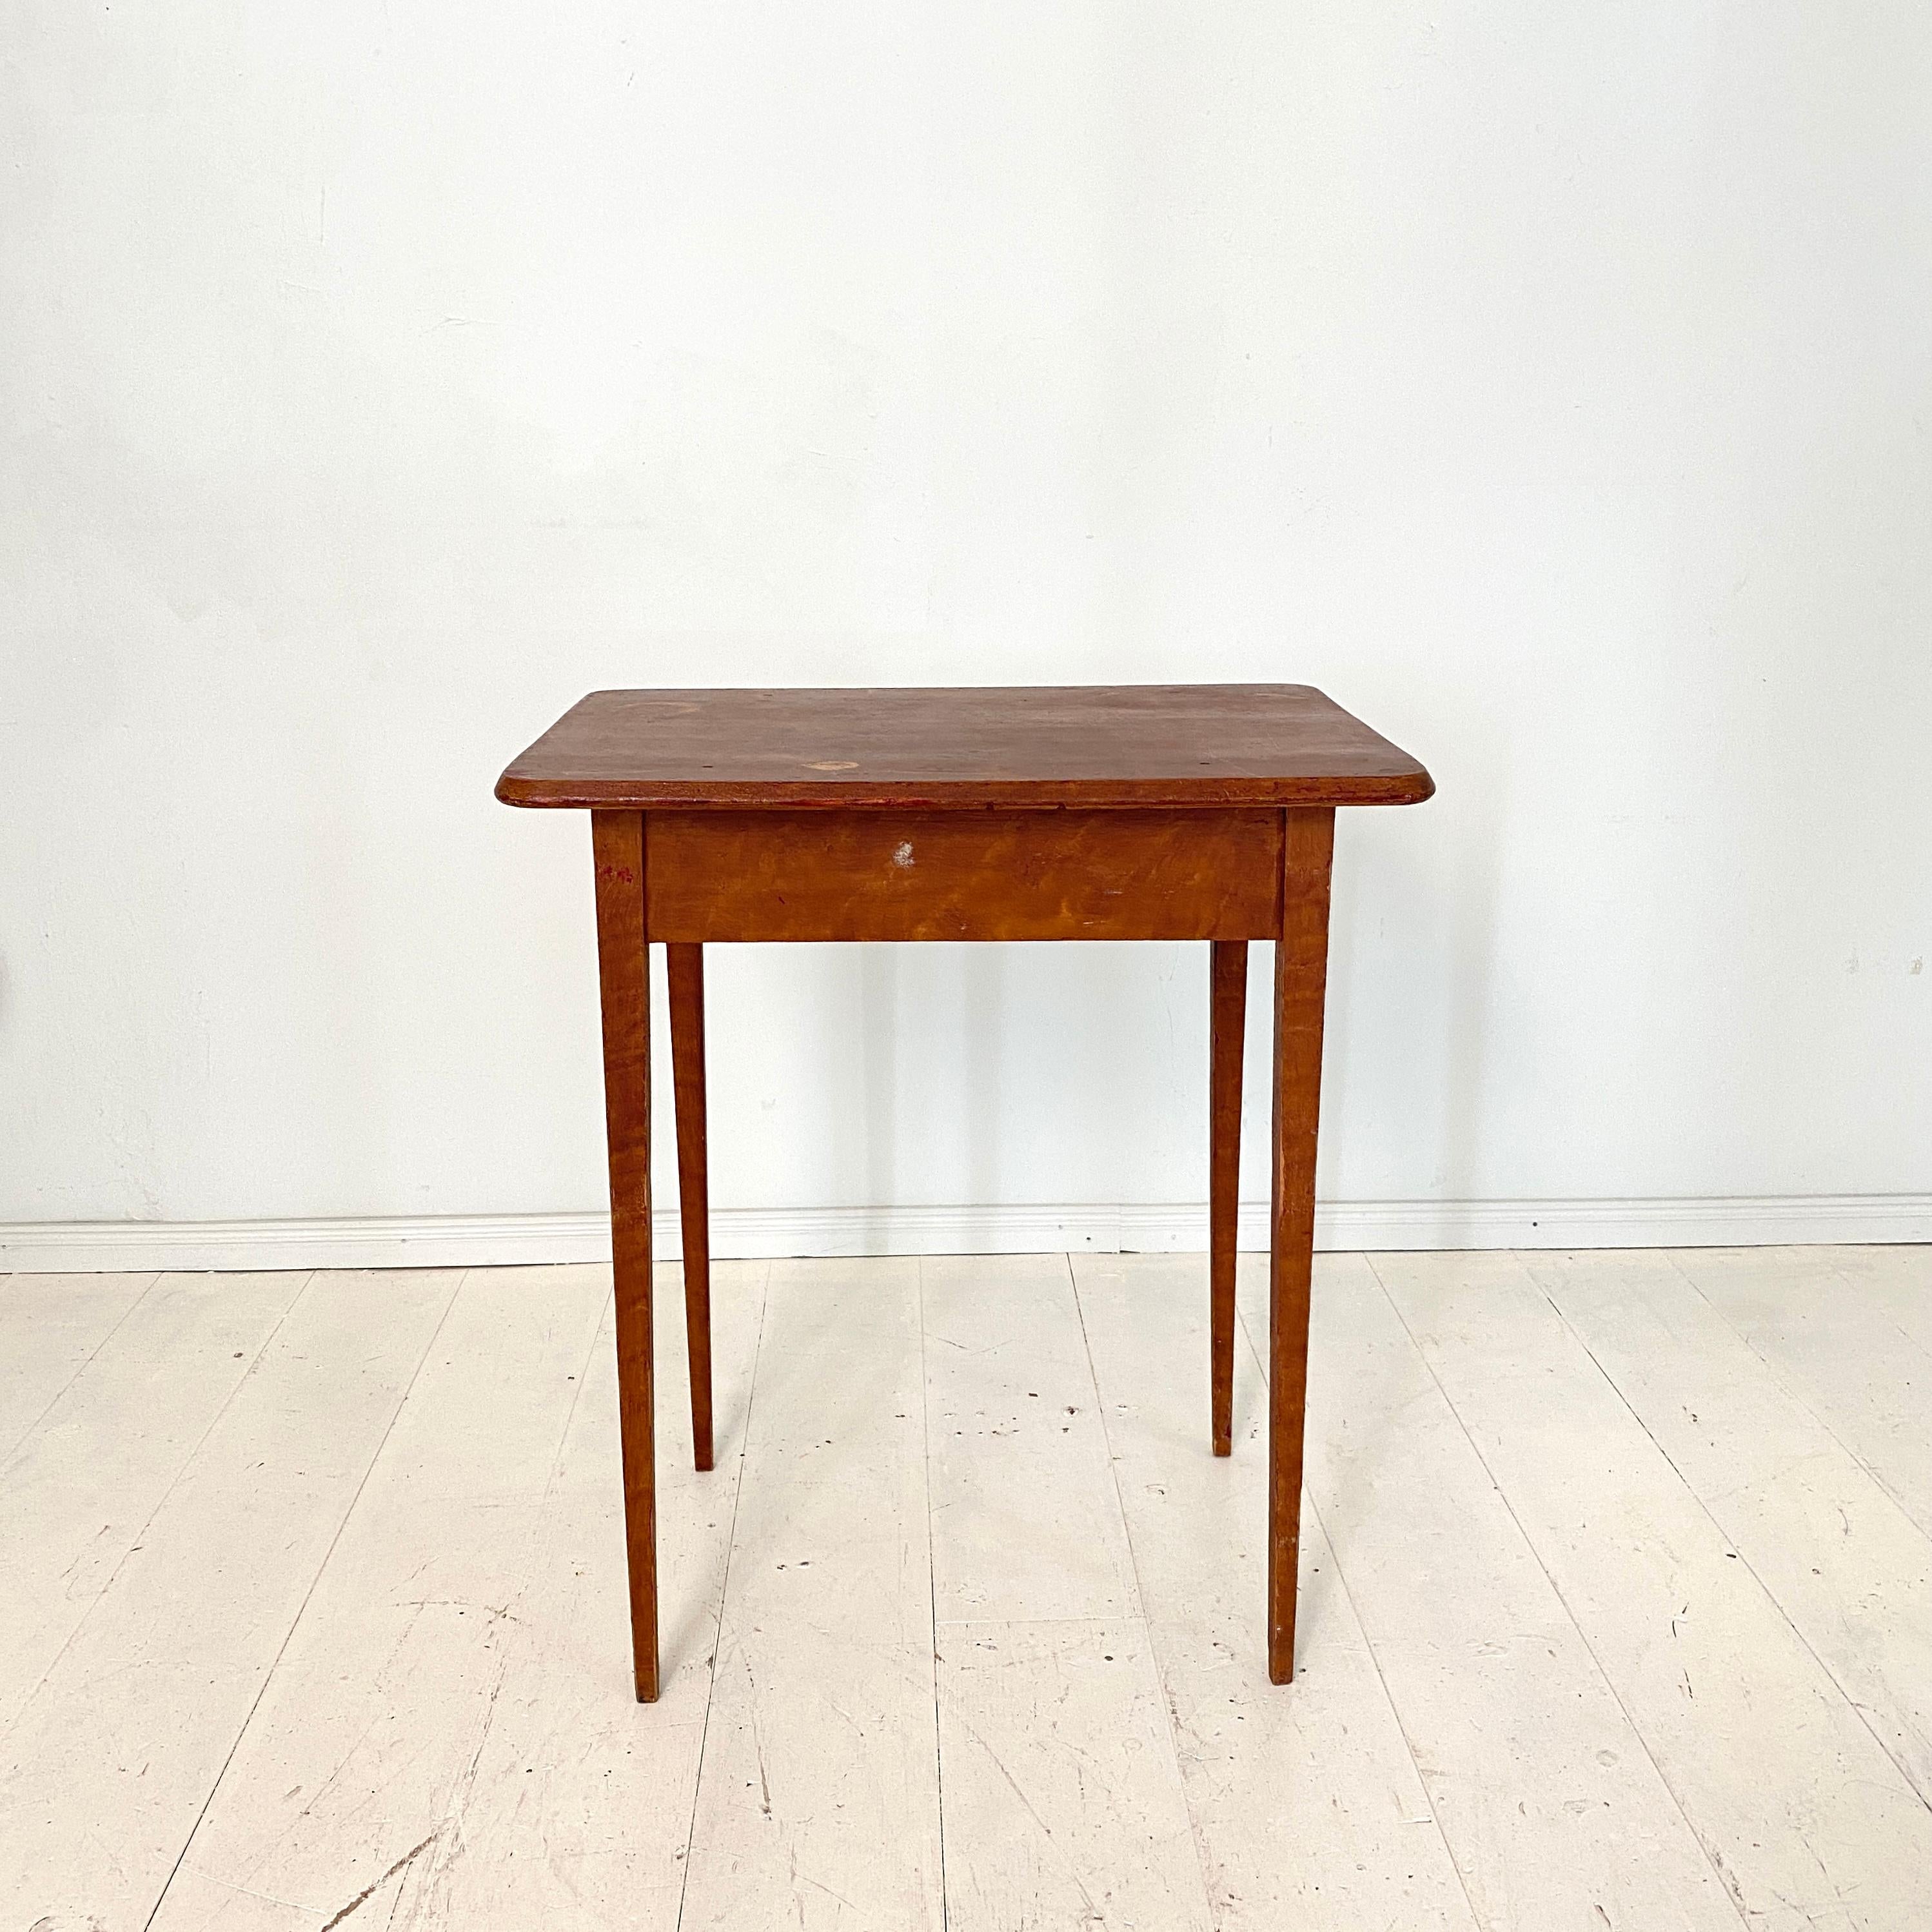 Hand-Painted Early 19th Century Red Northern Swedish Gustavian Country Table